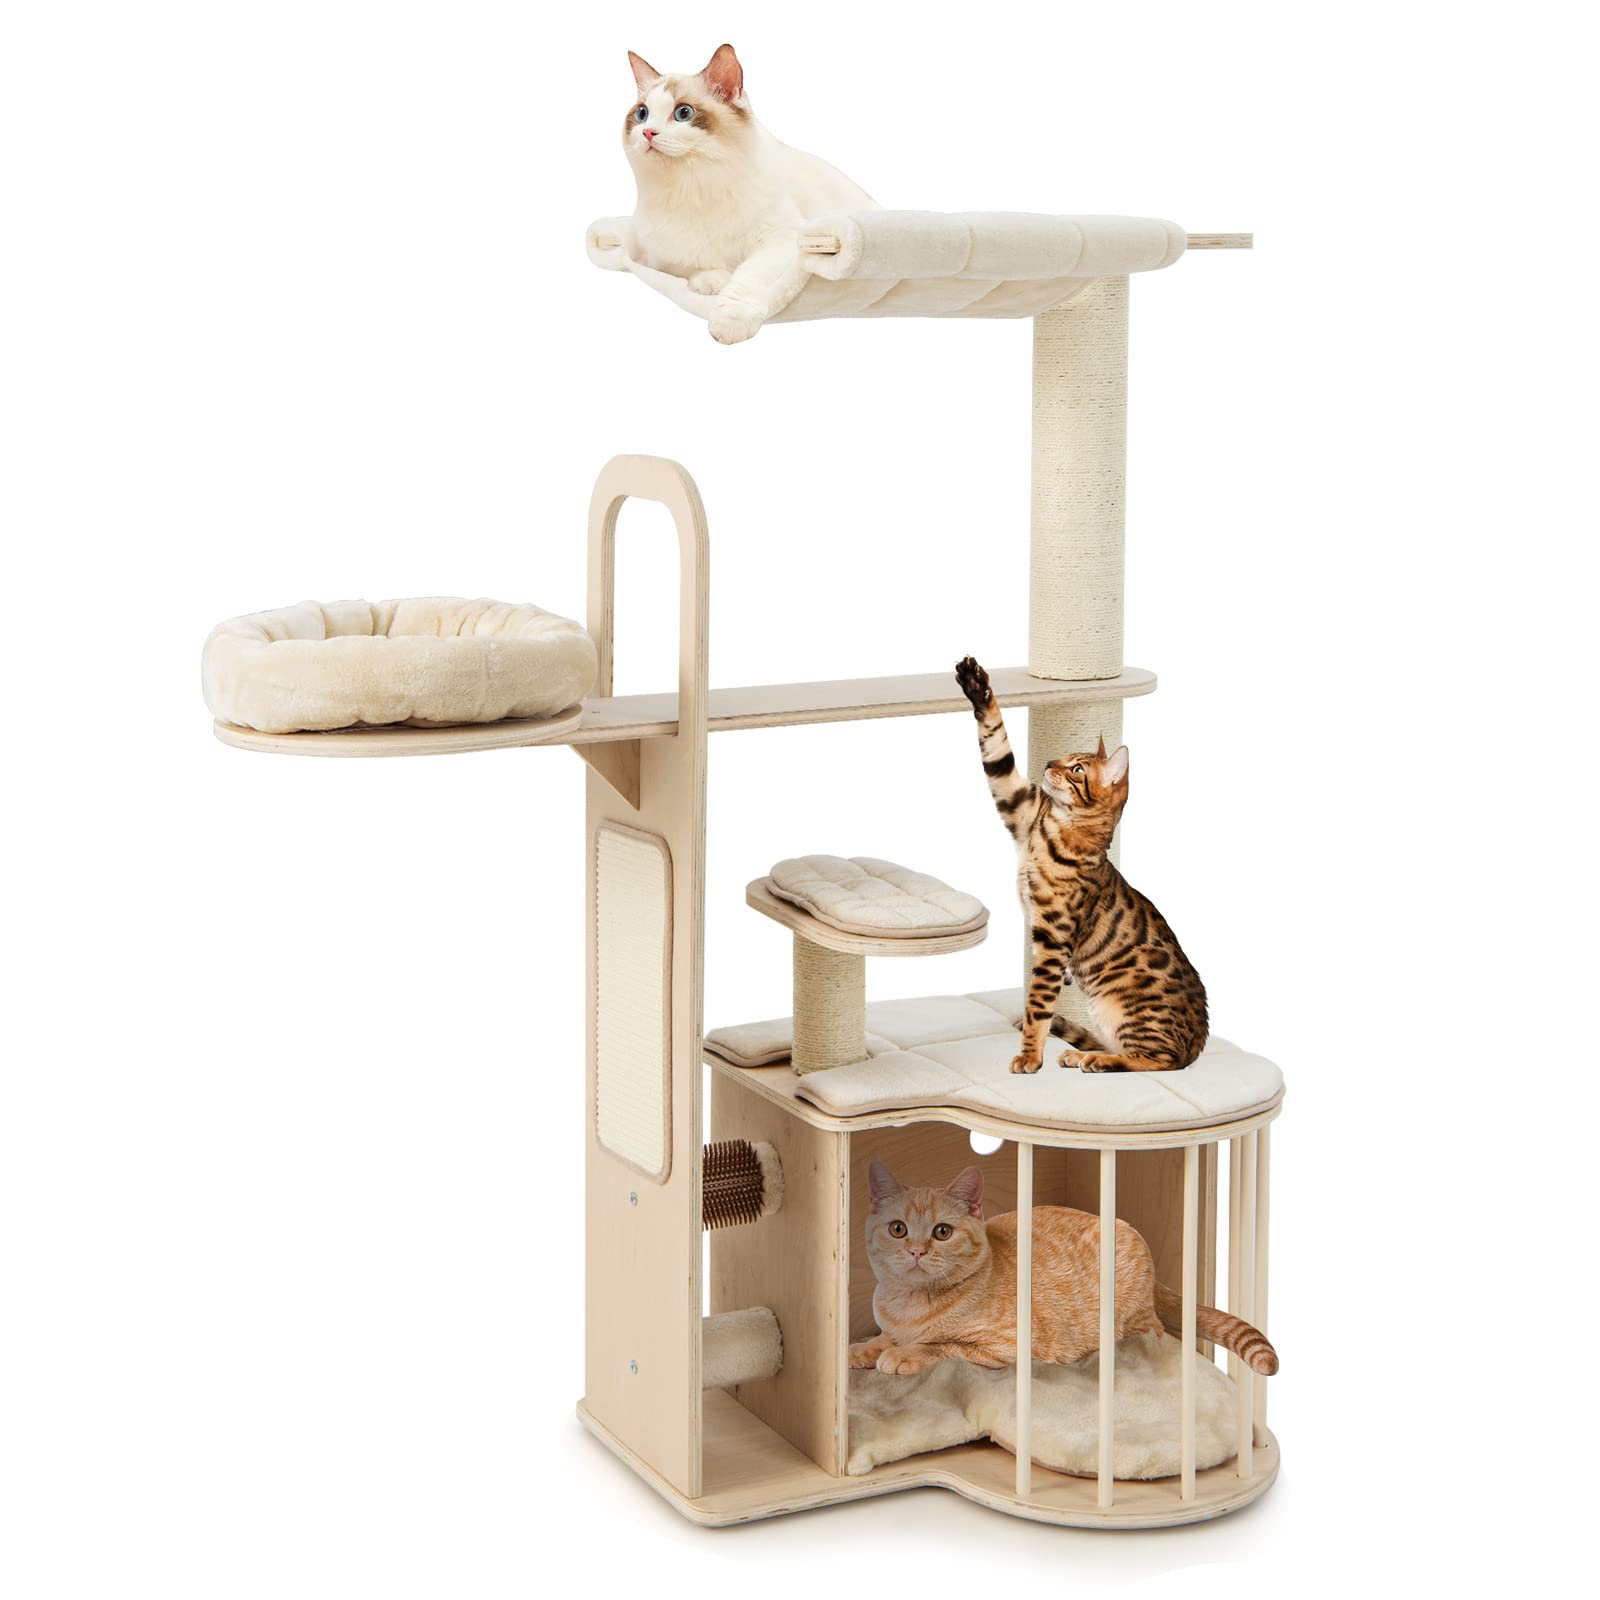 Tangkula Tall Cat Tree for Indoor Cats, 55 Inch Multi-Level Cat Tower Activity Center with Hammock